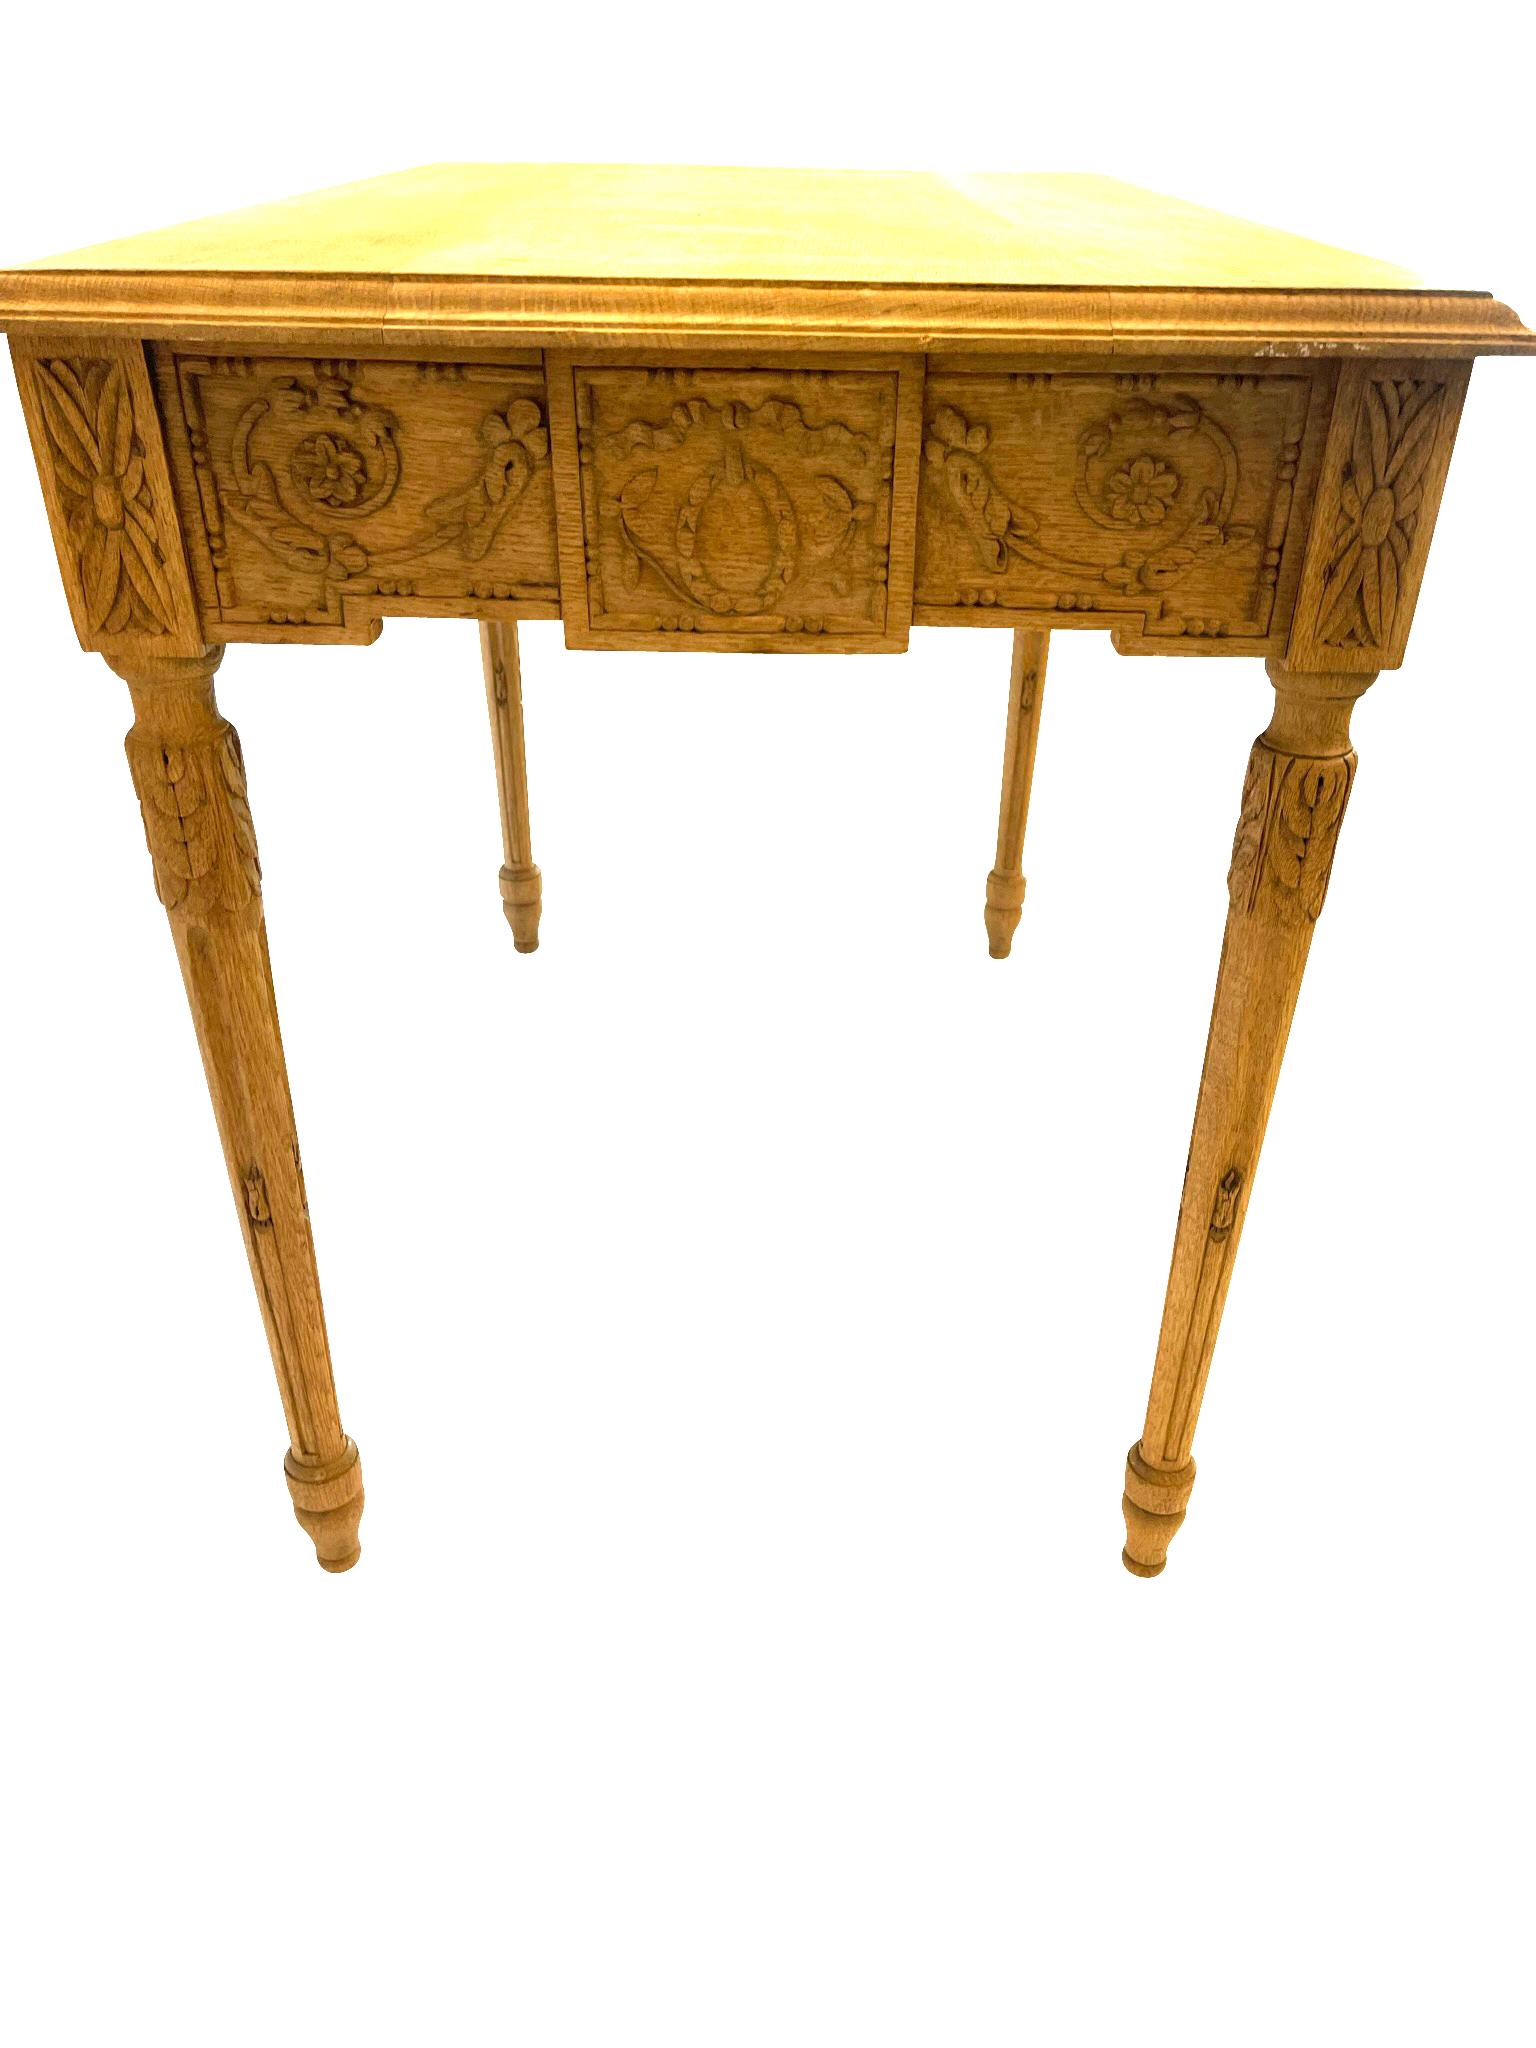 French Louis XVI Bleached Oak Side Table with Neoclassical Carved Designs  In Good Condition For Sale In Essex, MA